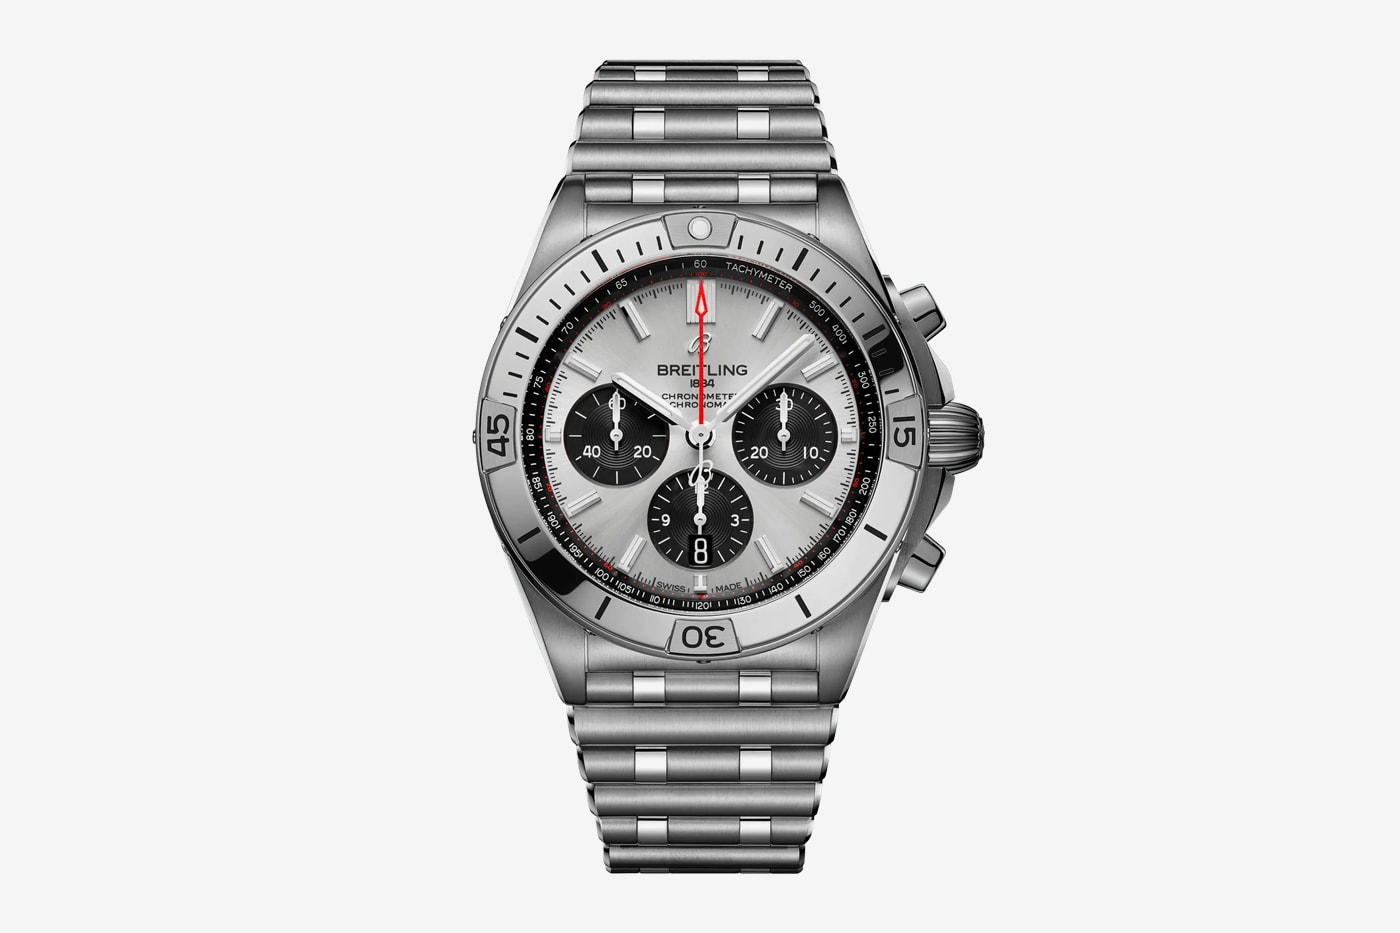 breitling chronomat 2020 watch refresh info sports watch stainless steel Rouleaux bracelet 42mm case signature rider tabs rotating bezel Caliber 01 movement two-tone finishes Bentley edition